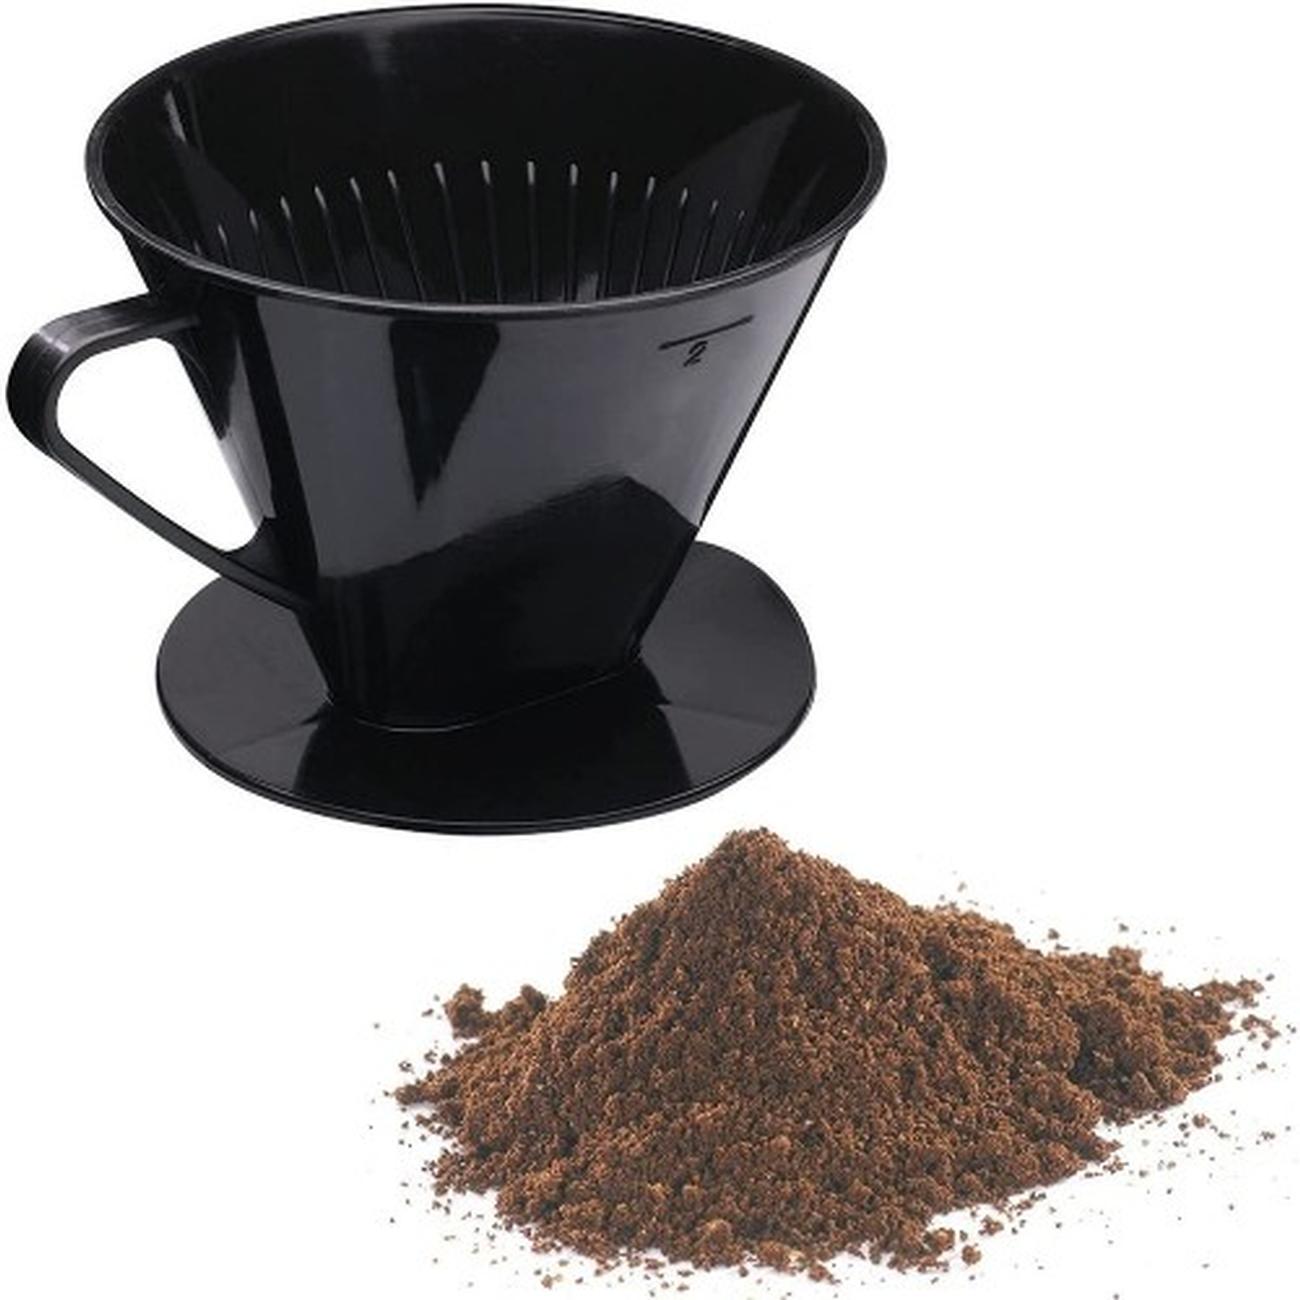 westmark-drip-coffee-filter-two - Westmark Coffee Filter Size 2